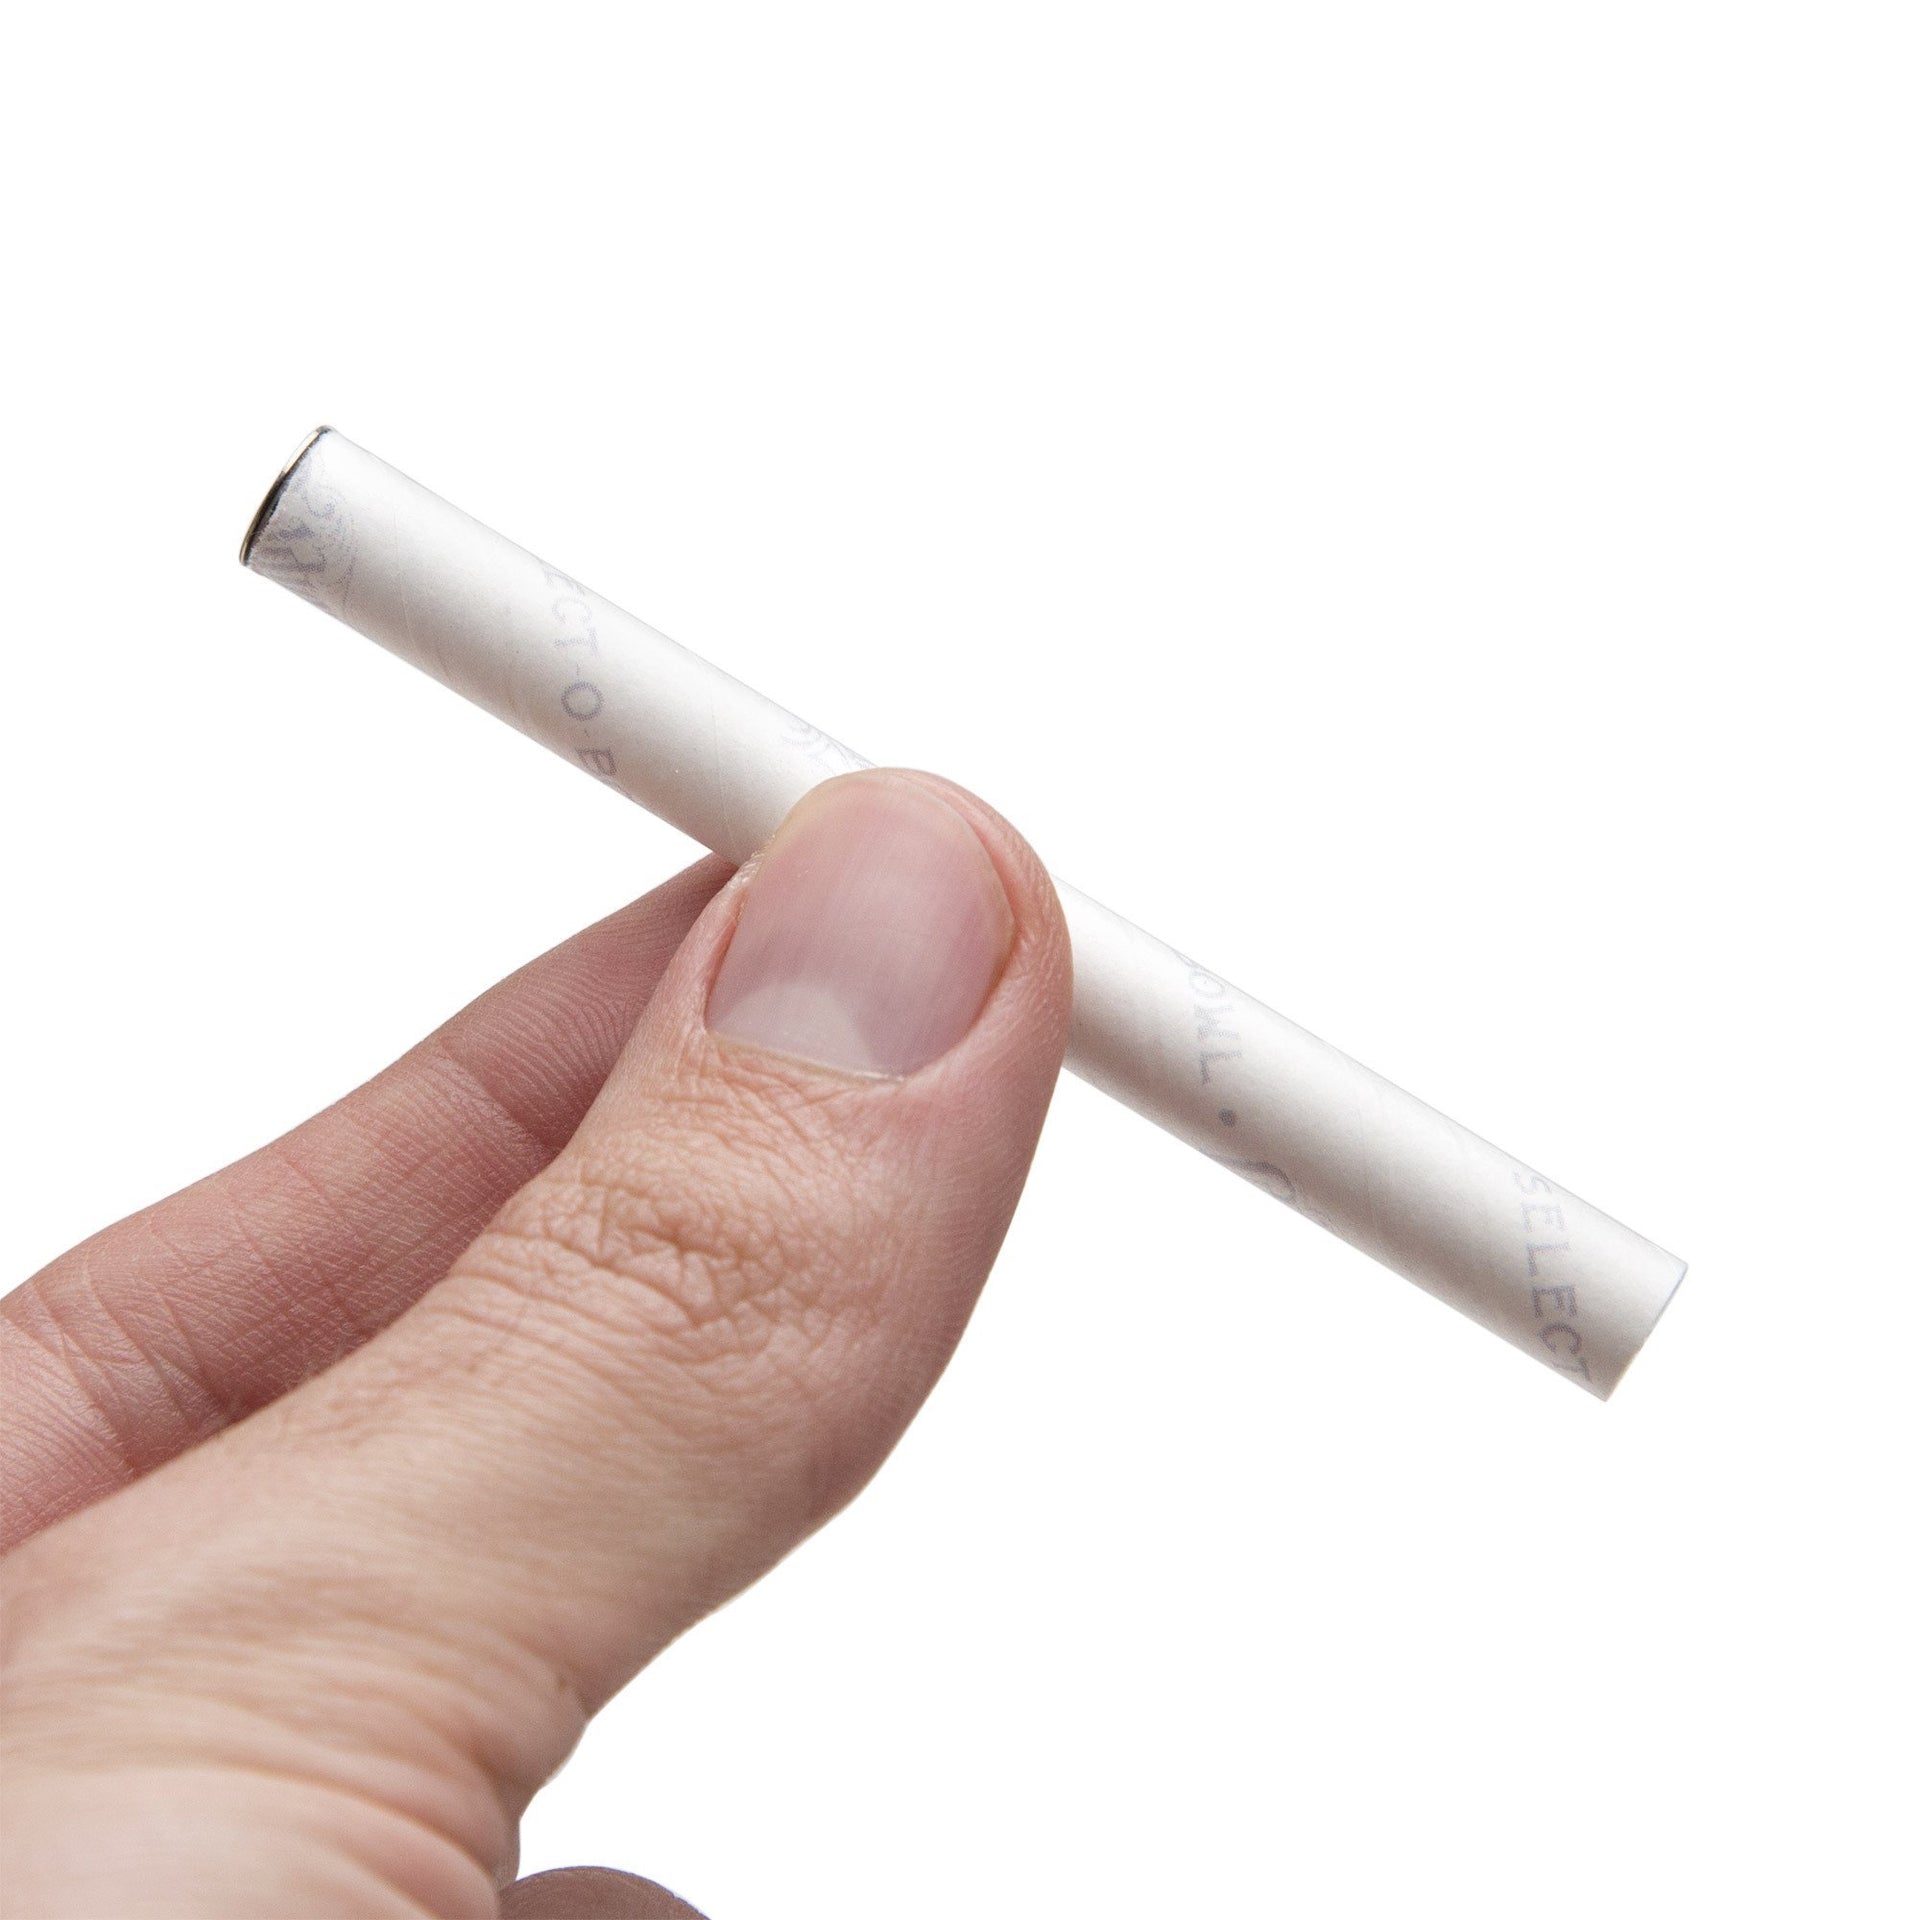 Caldwell's Disposable One Hitter - 420 Science - The most trusted online smoke shop.